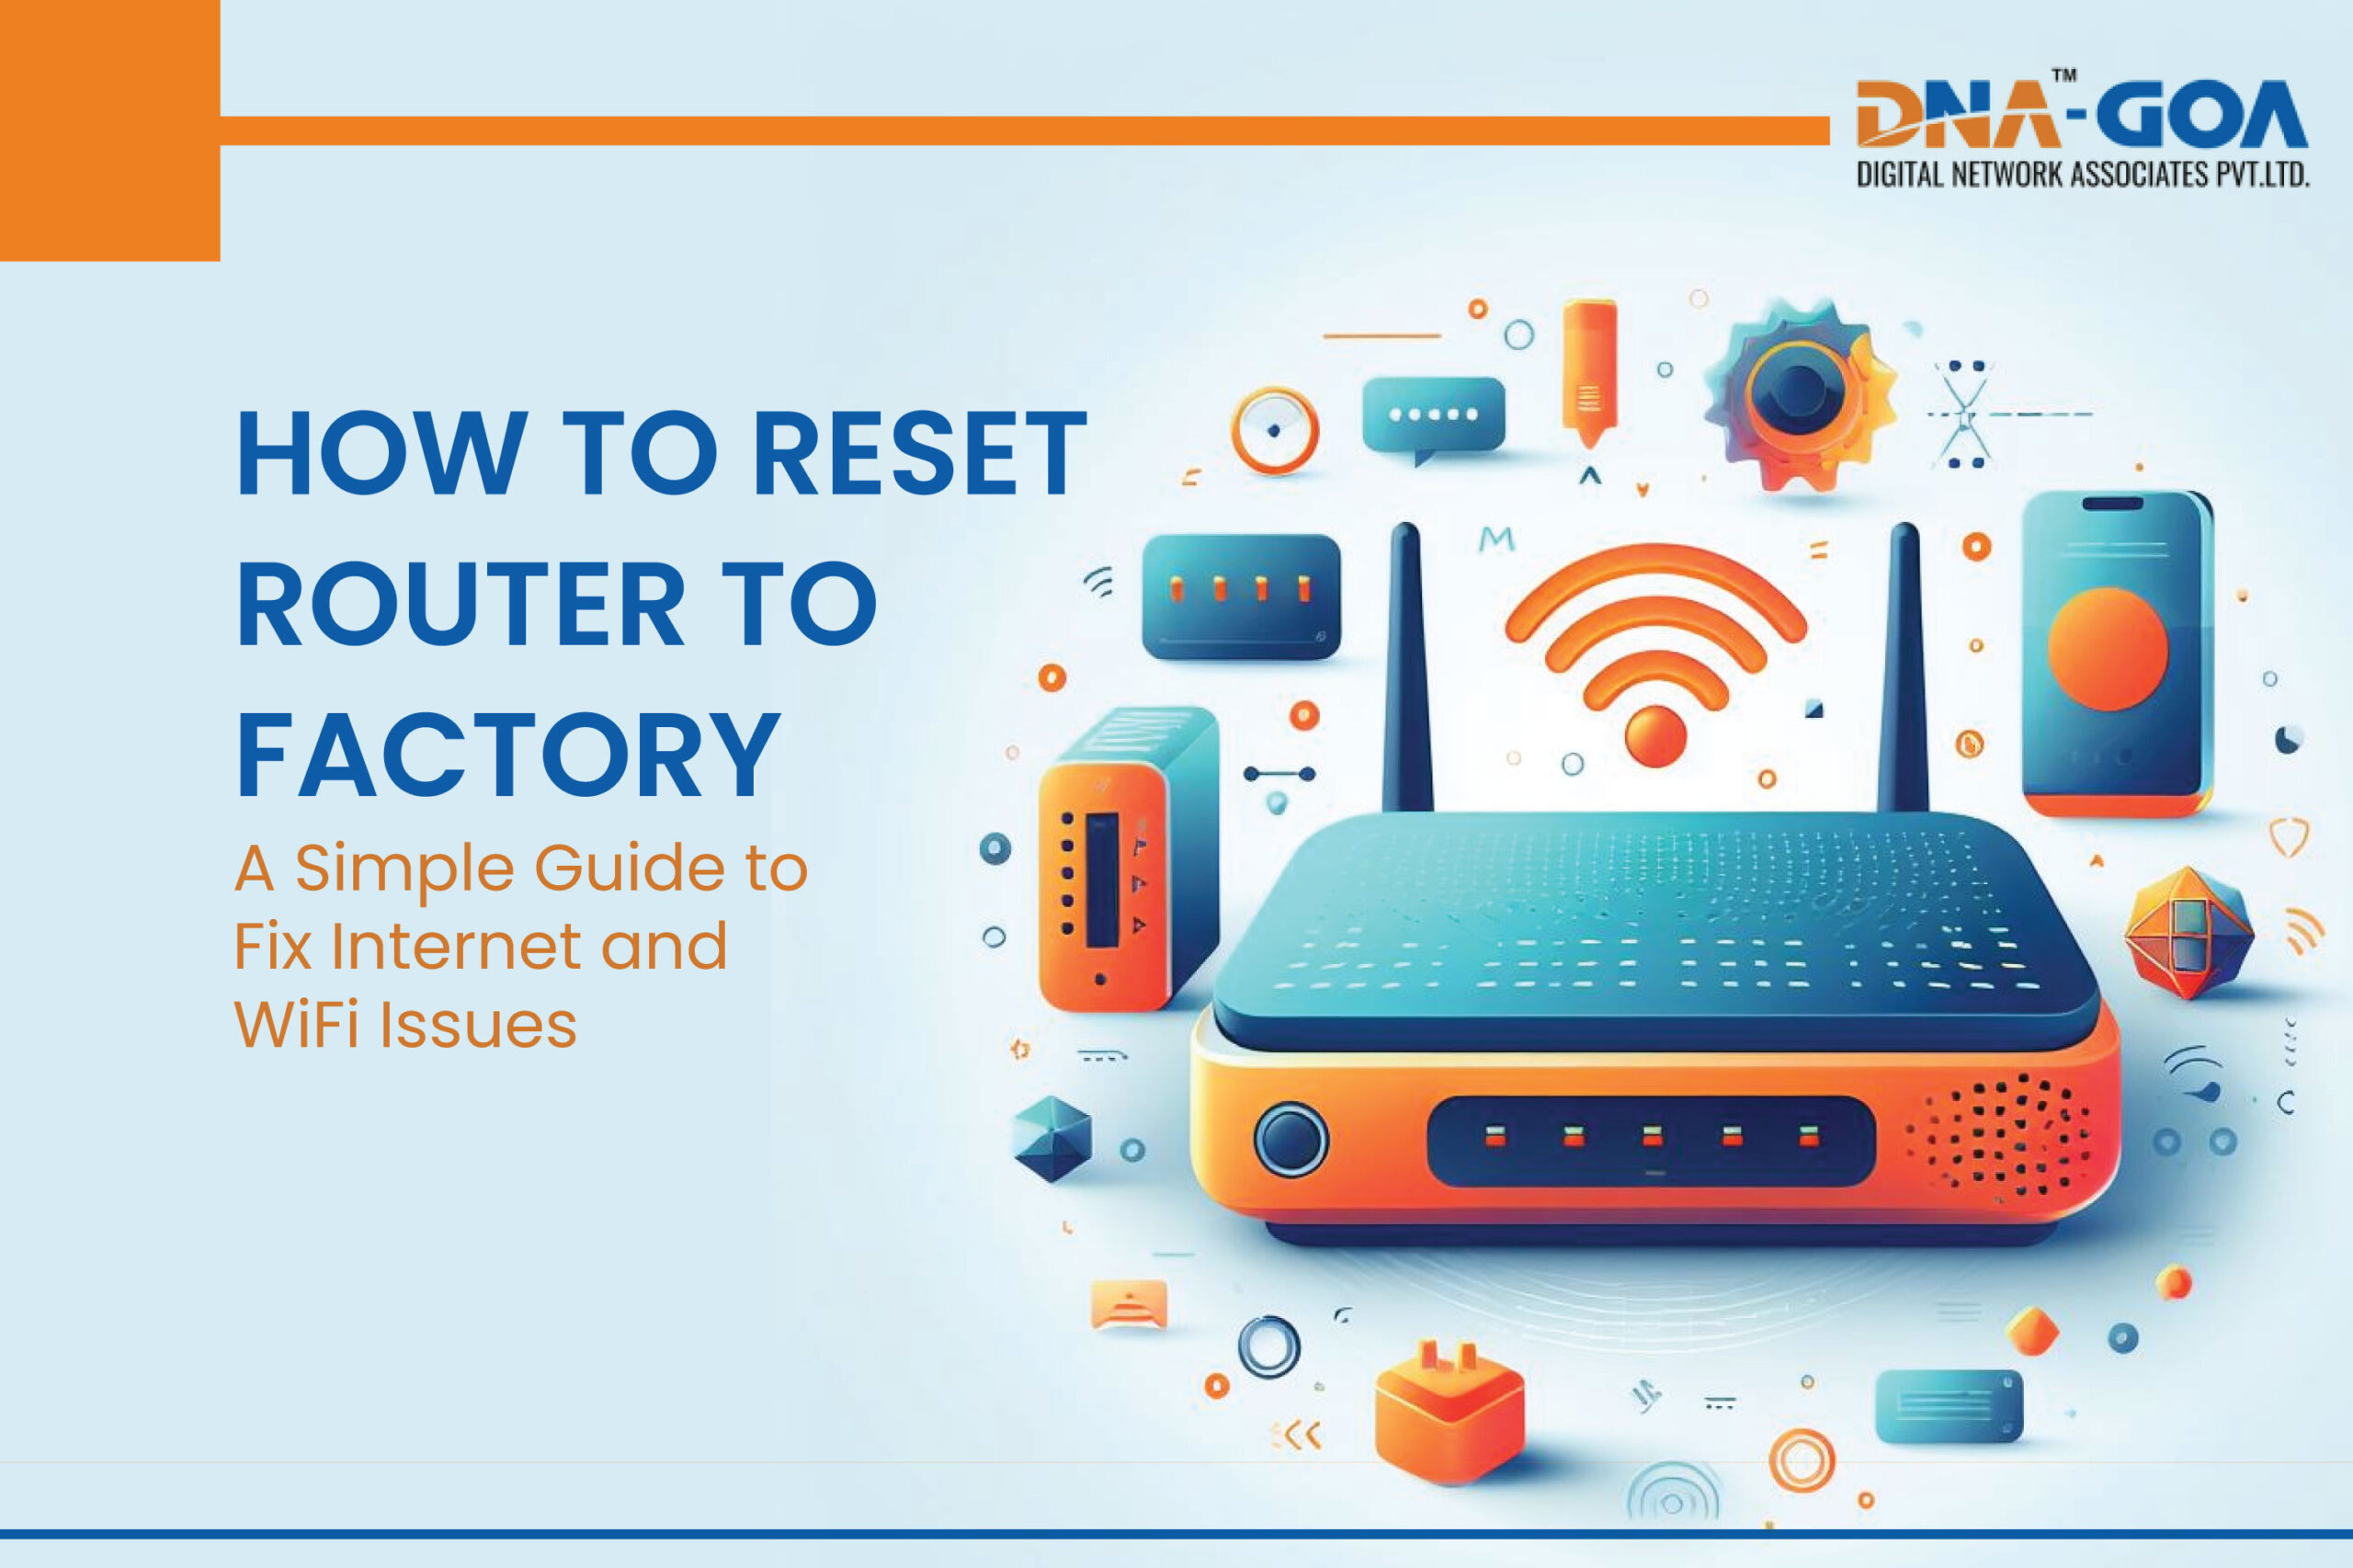 How to Reset Router to Factory